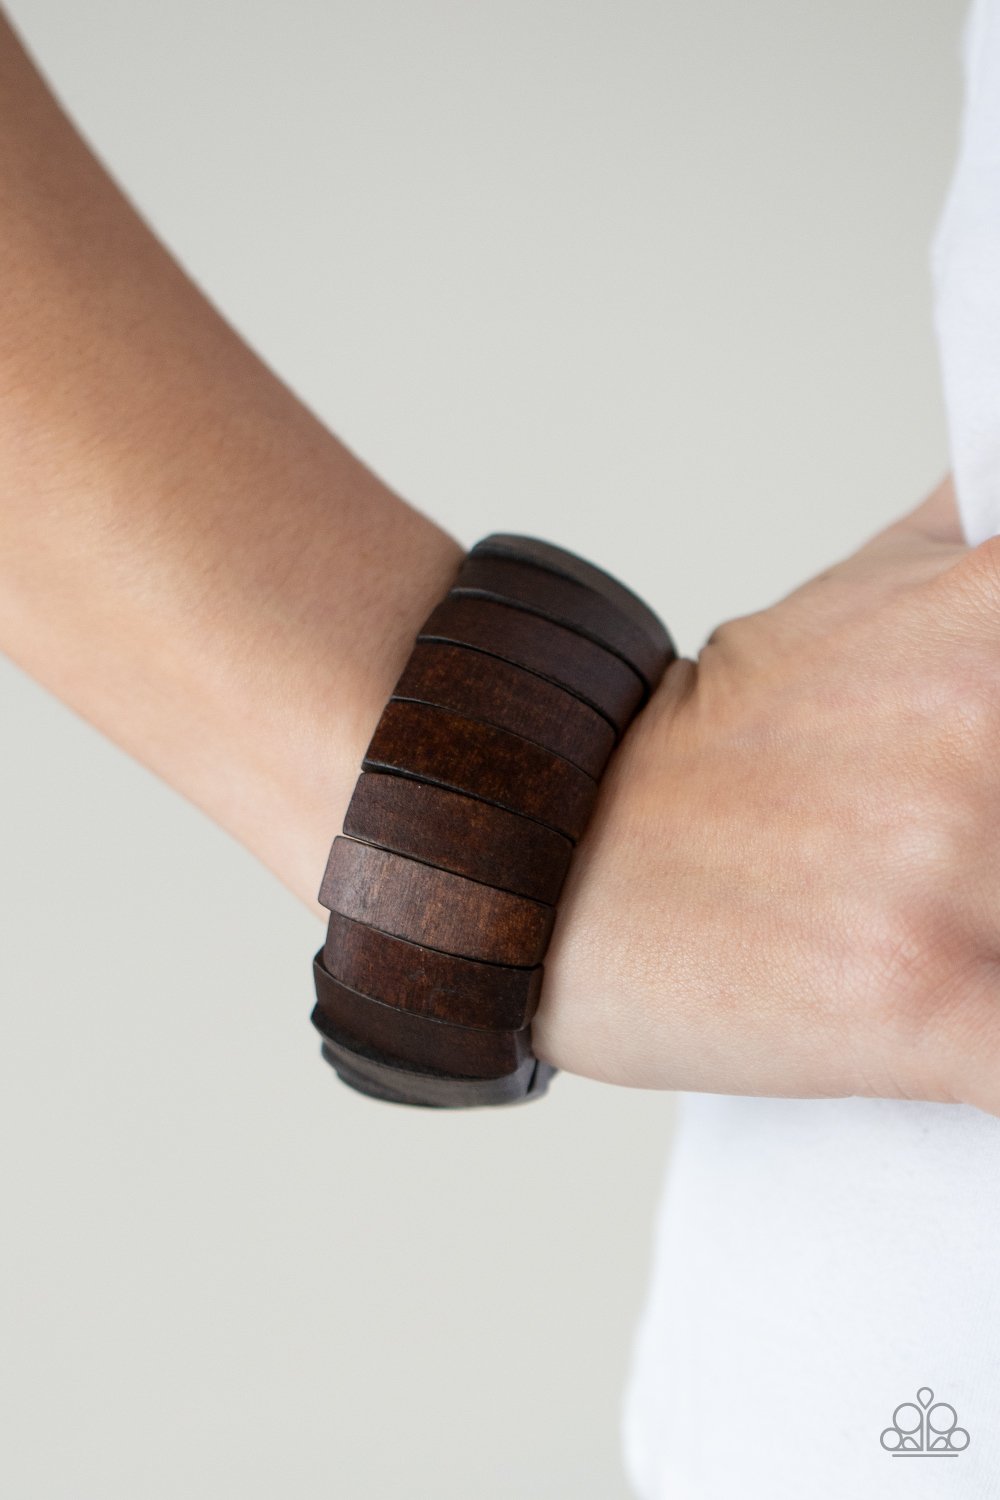 &lt;p&gt;A bold collection of brown wooden beads are threaded along stretchy bands around the wrist for a colorful display.&lt;/p&gt;  
 

 &lt;p&gt; &lt;i&gt;Sold as one individual bracelet.&lt;/i&gt; &lt;/p&gt;
 

 

&lt;h5&gt;Paparazzi Accessories • $5 Jewelry&lt;/h5&gt;